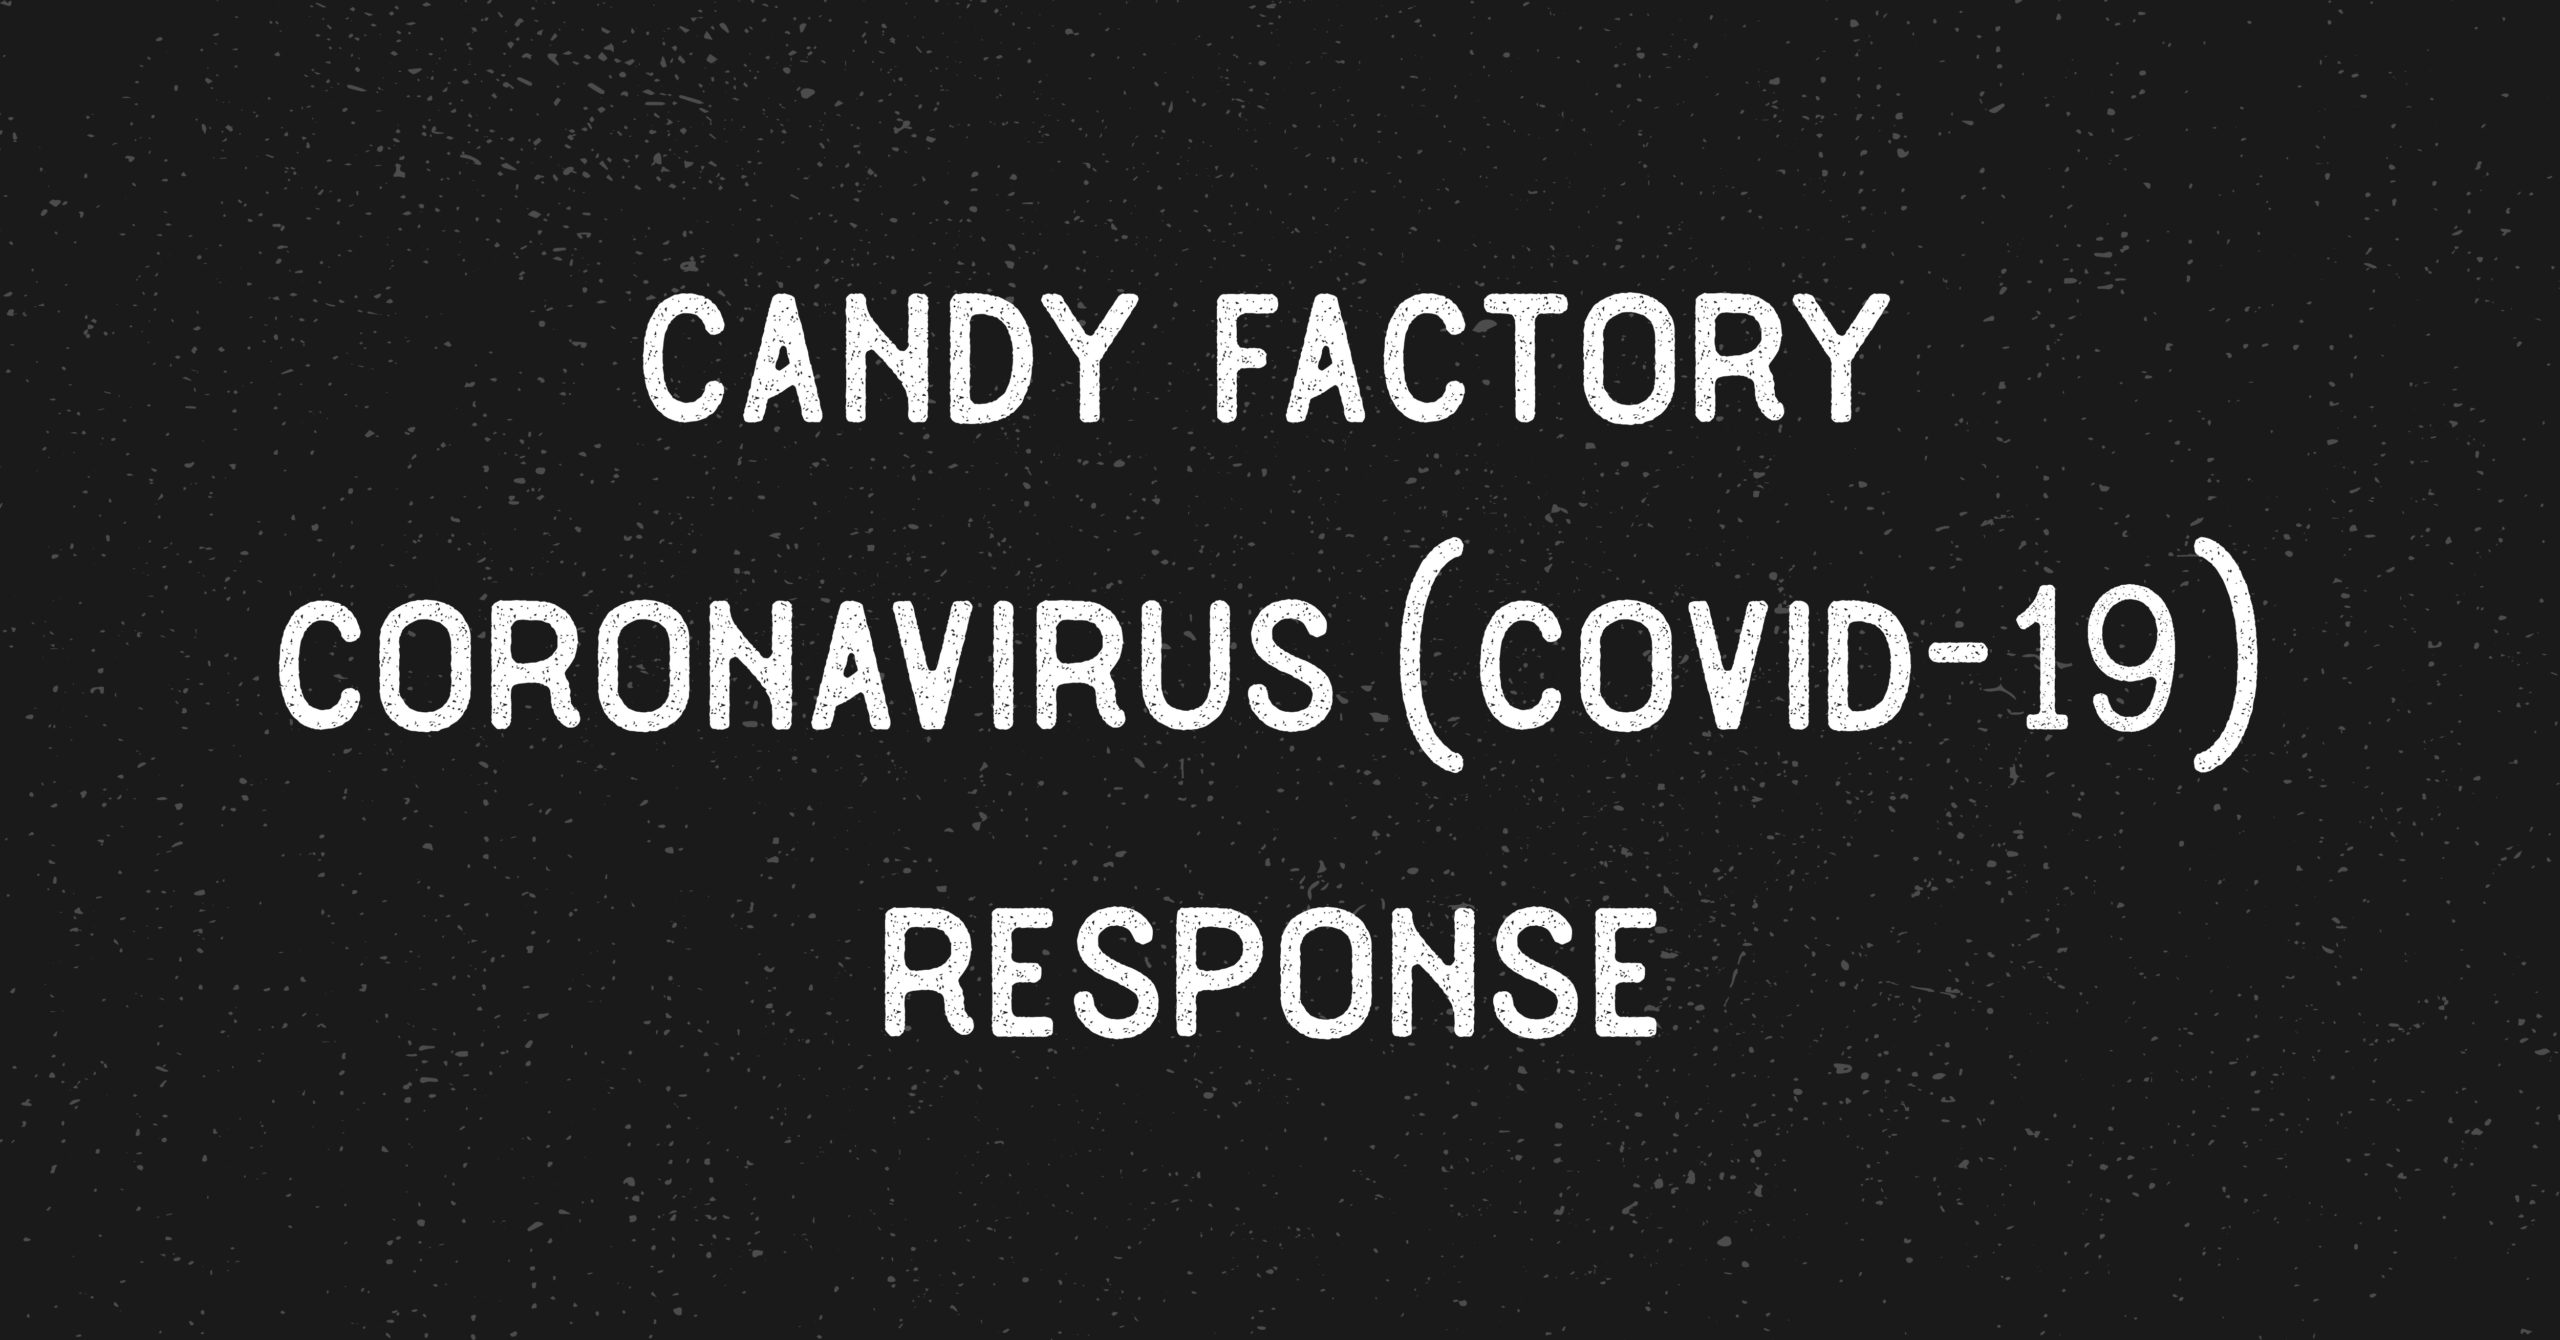 Candy Factory COVID-19 Response